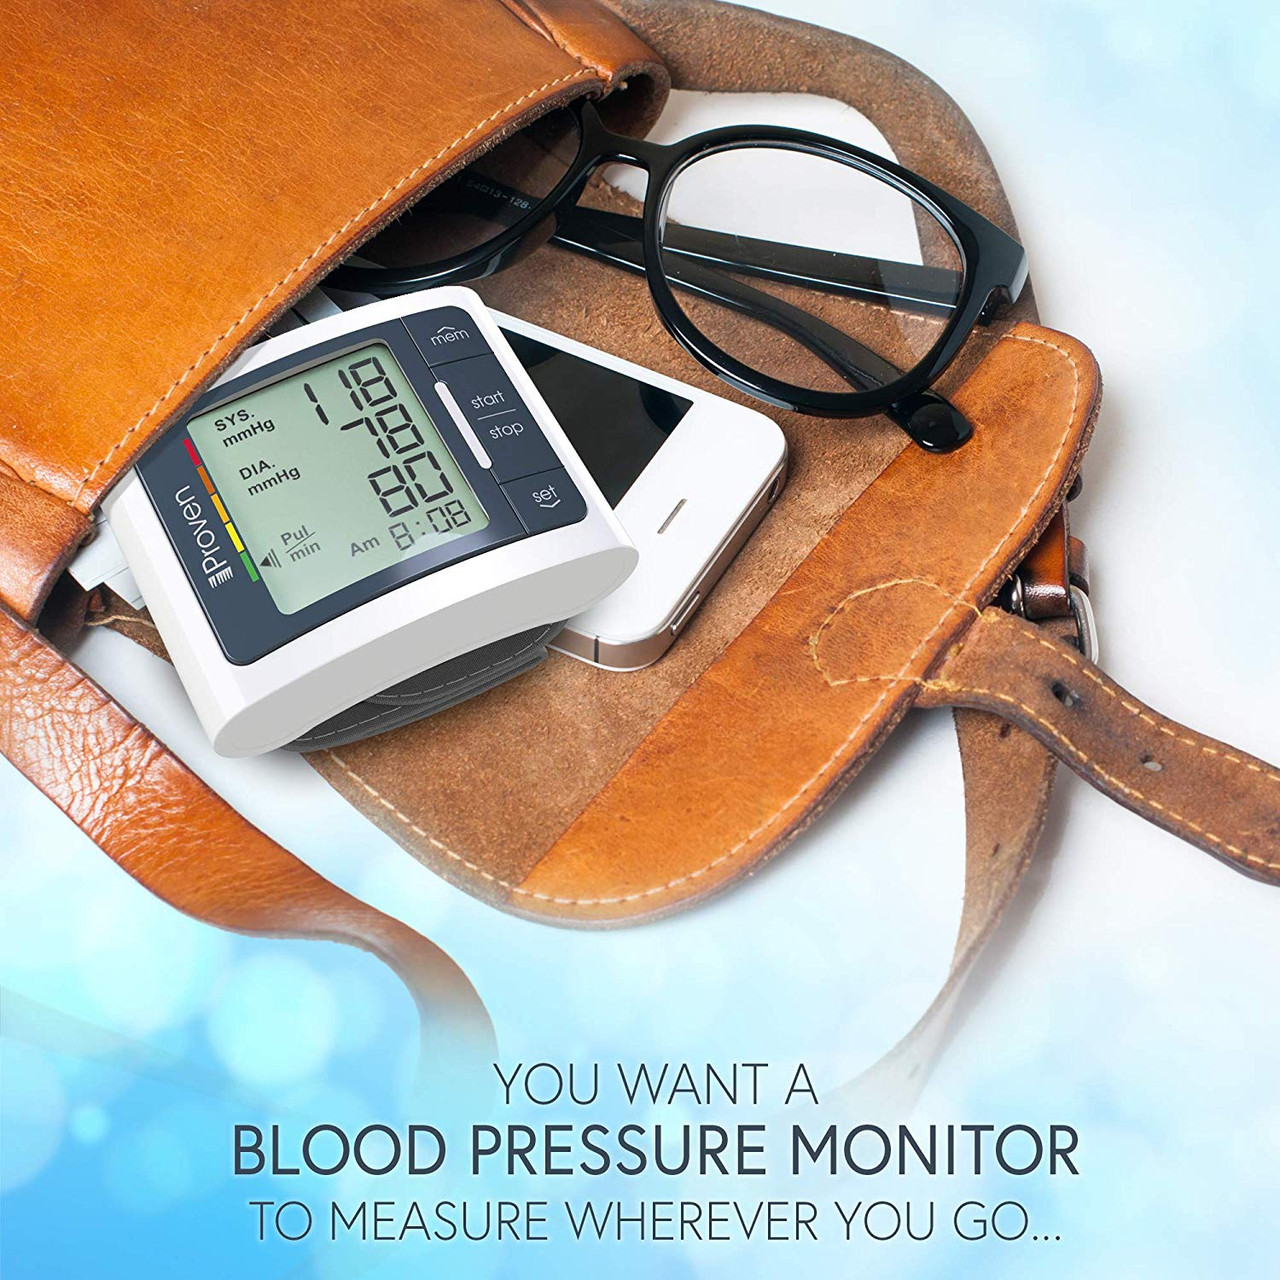 How to use the iProven Wrist Blood Pressure Monitor 